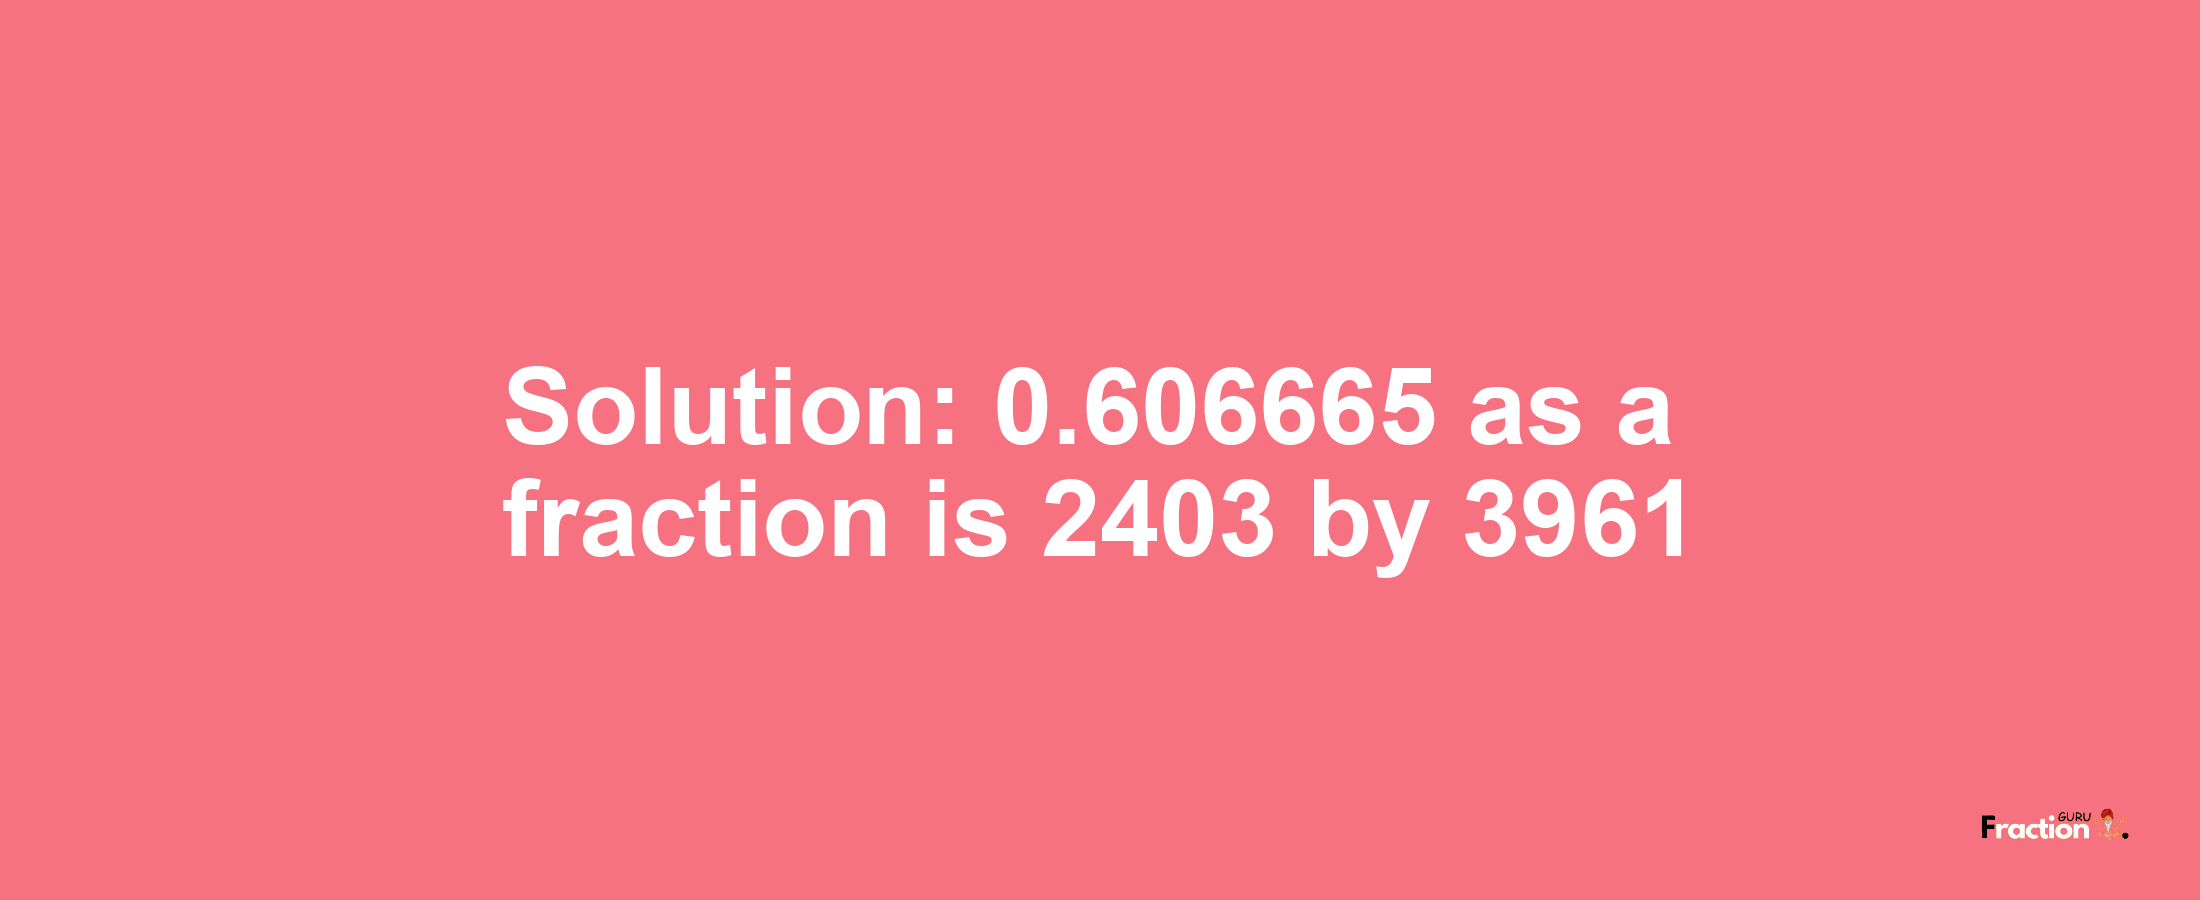 Solution:0.606665 as a fraction is 2403/3961